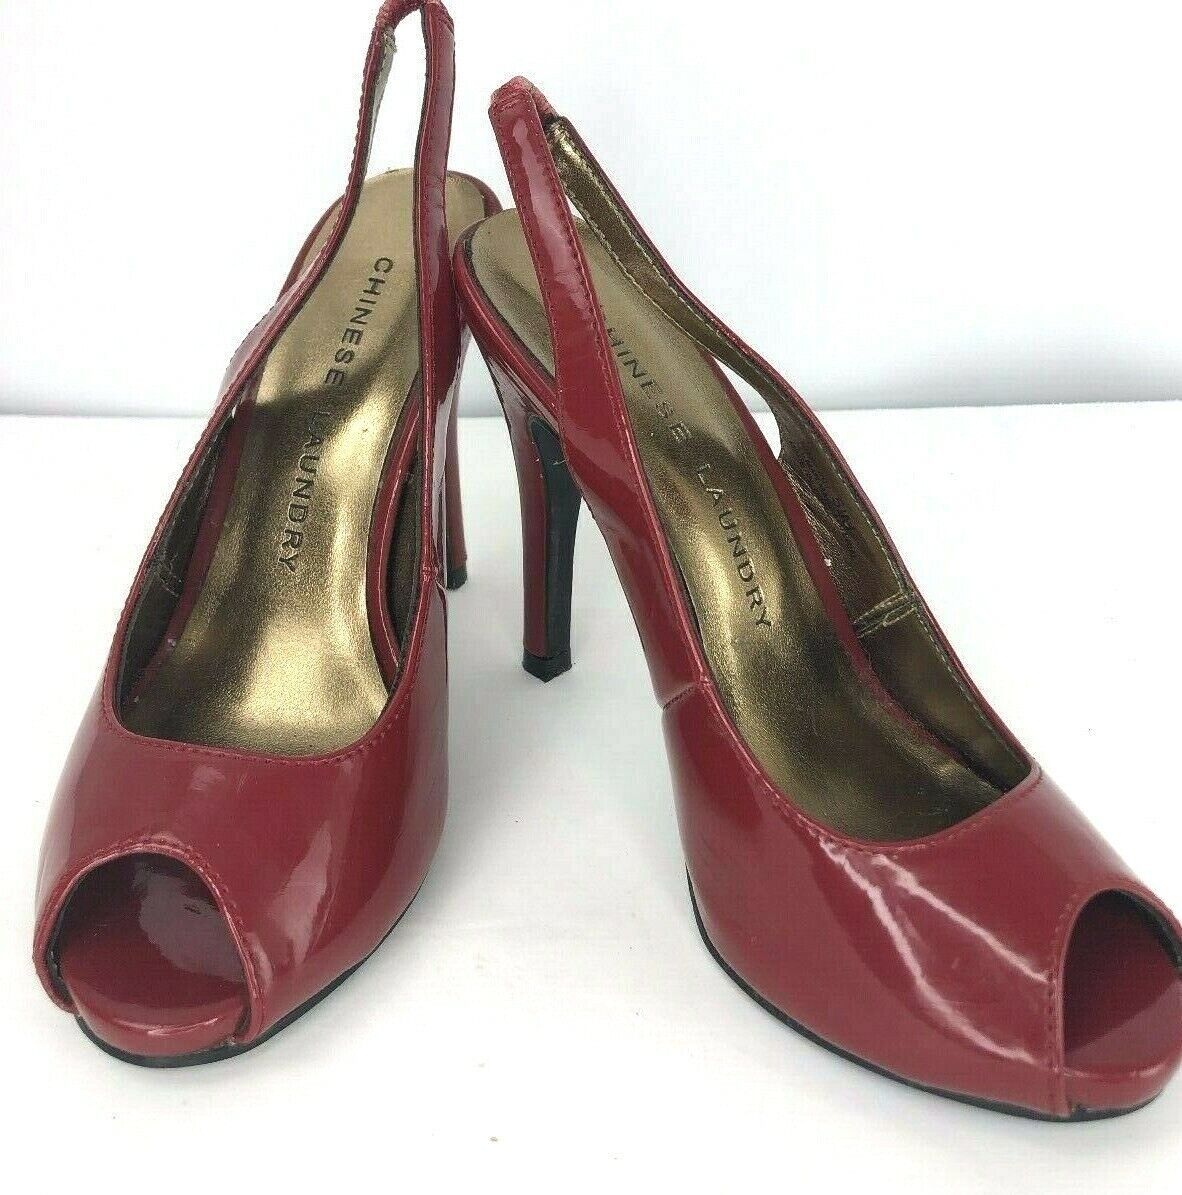 Primary image for Chinese Laundry Red Patent Sling Back Peep Toe Sandal  5.5 M Shoe 